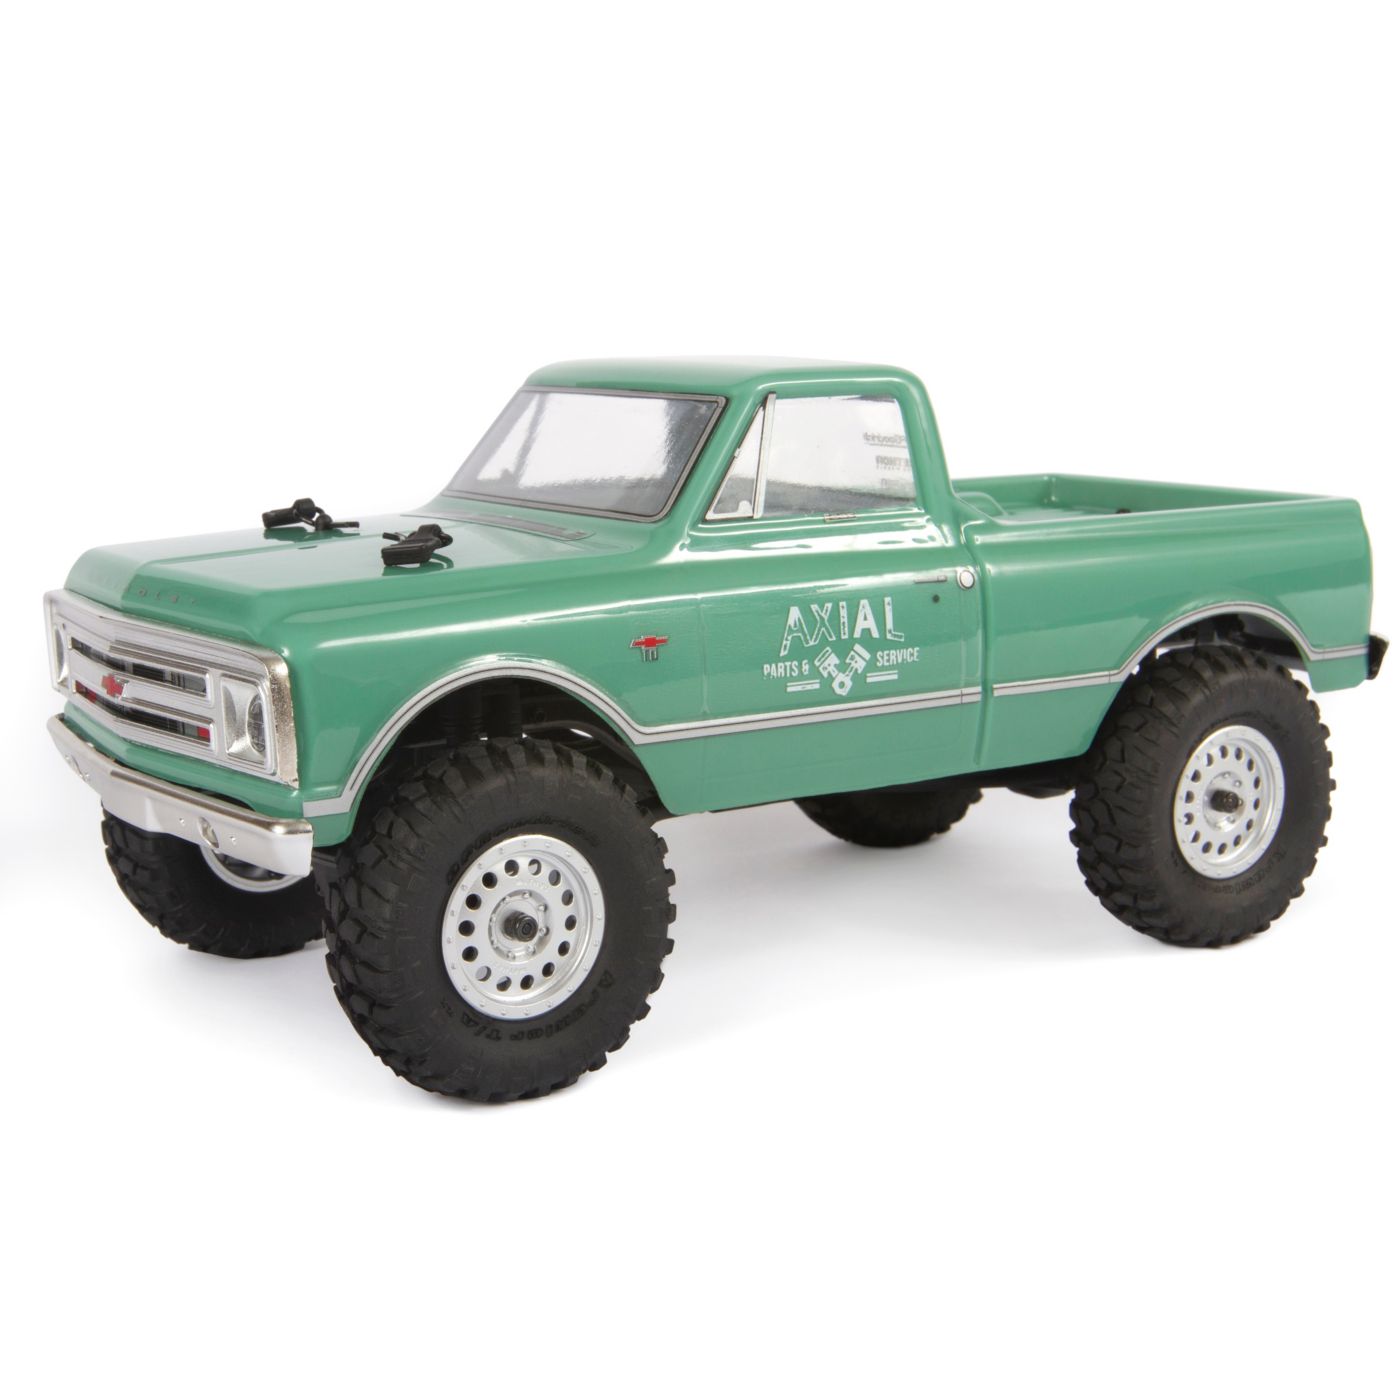 Axial 1/24 SCX24 1967 Chevrolet C10 4WD Truck Brushed RTR Green